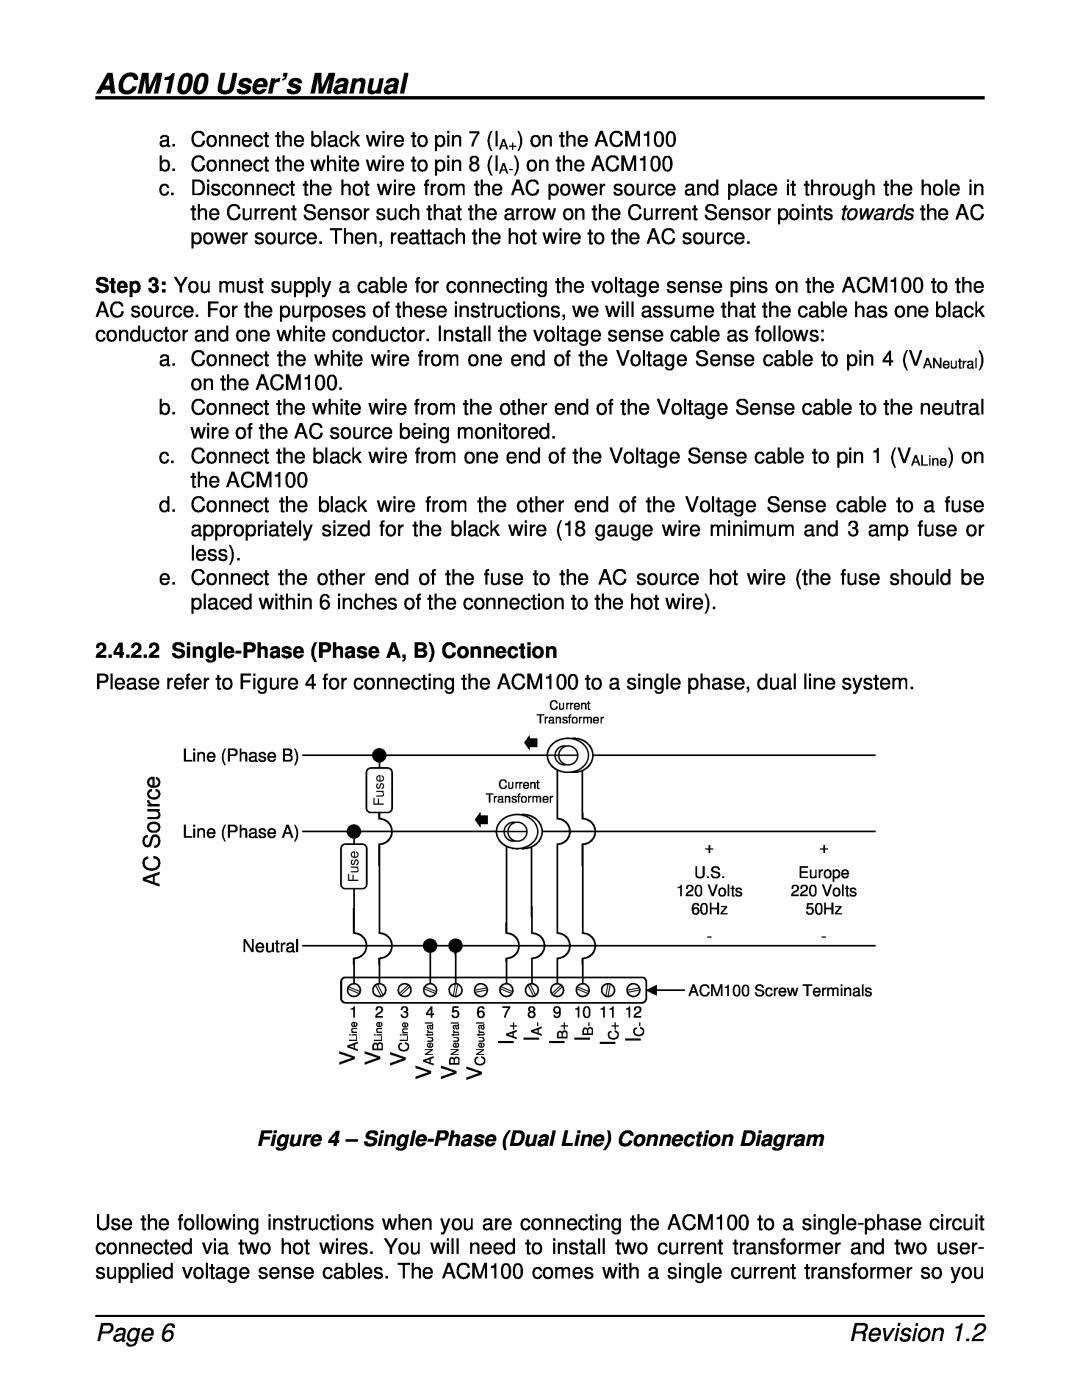 Maretron user manual Single-Phase Phase A, B Connection, ACM100 User’s Manual, Page, Revision 